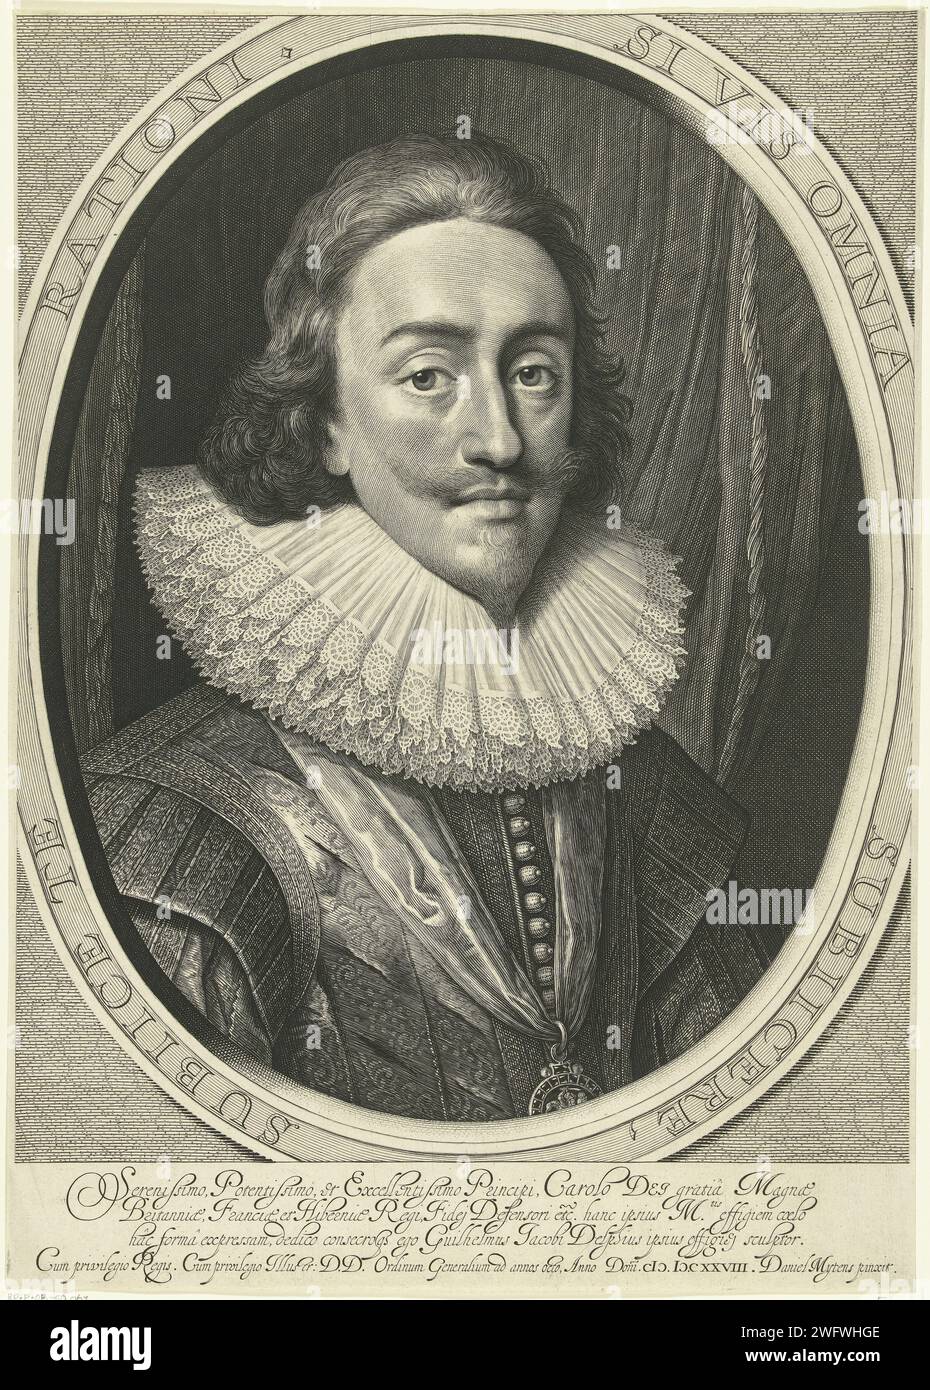 Portrait of Charles I, King of England in Ovaal, Willem Jacobsz Delff, After Daniël Mijtens (I), 1628 print Portrait of Charles I, king of England, breastpiece in oval with pleated remedy and medallion with holy Georgius the Great. Motto on oval accompaniment, Latin inscription in STUDMARGE. Delft paper engraving ruler, sovereign. neck-gear: collar (+ men's clothes) Stock Photo